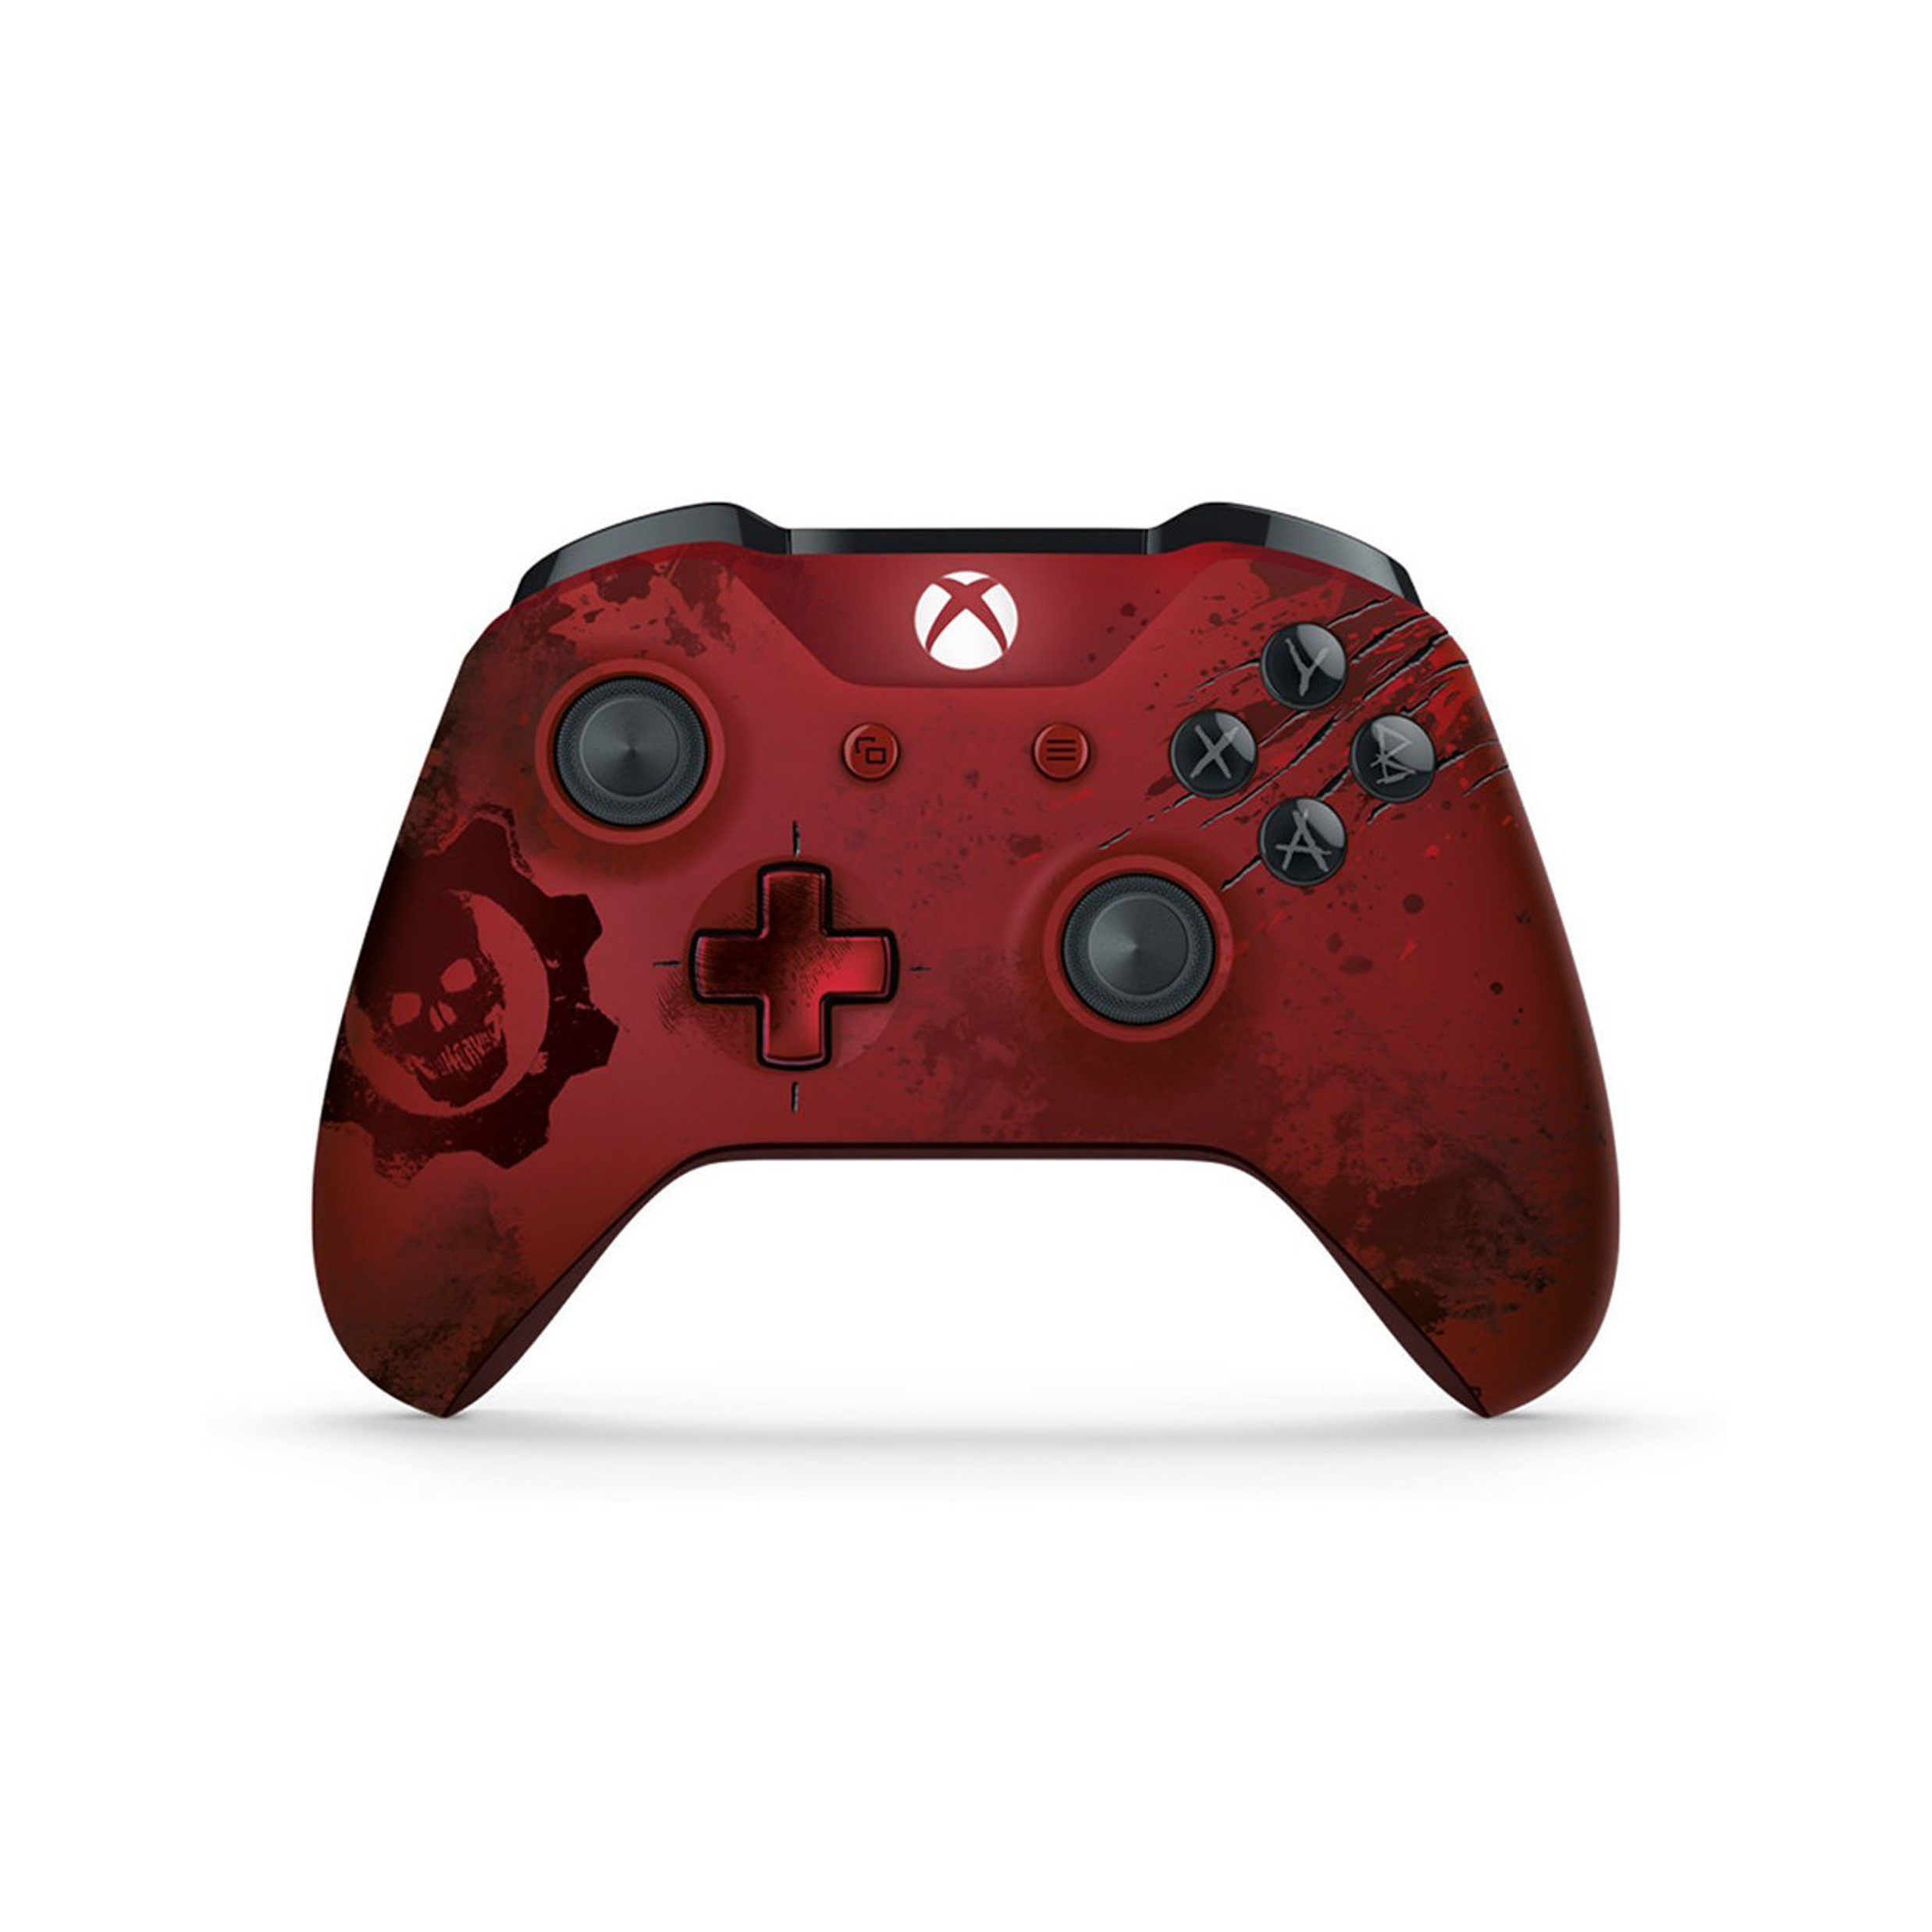 Microsoft Xbox One S Controller - Gears of War 4 Crimson Omen Limited Edition